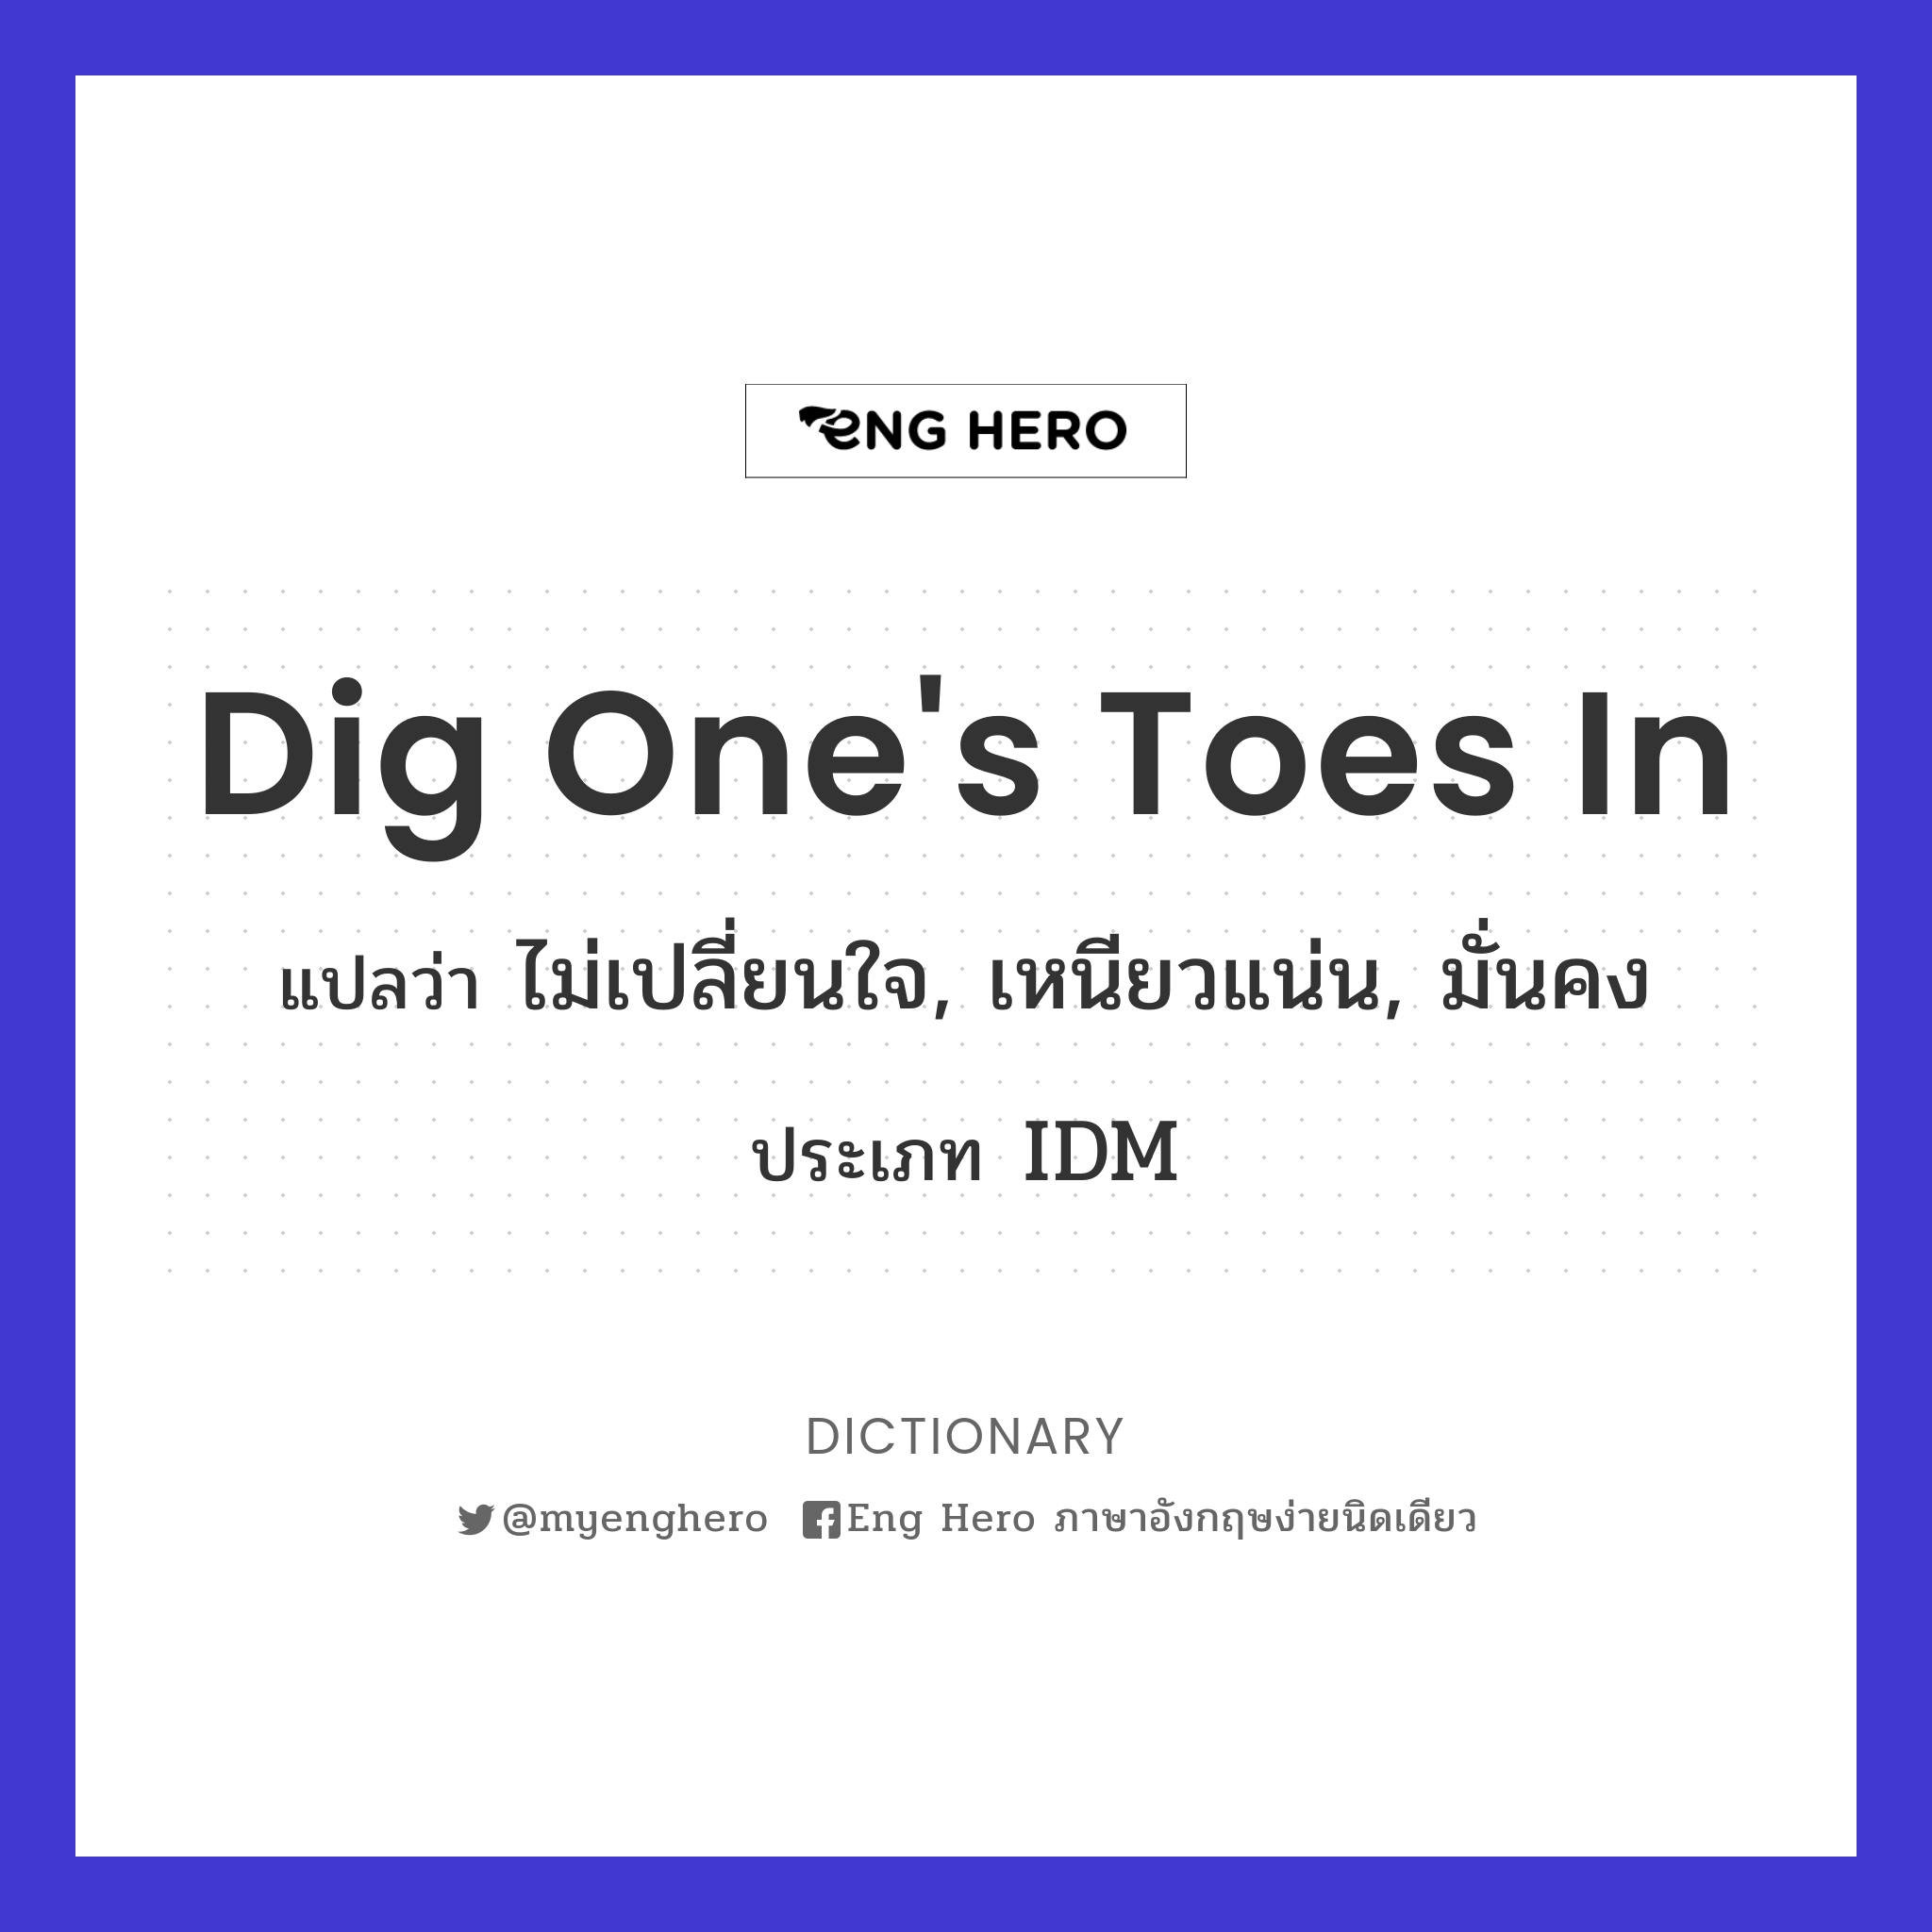 dig one's toes in